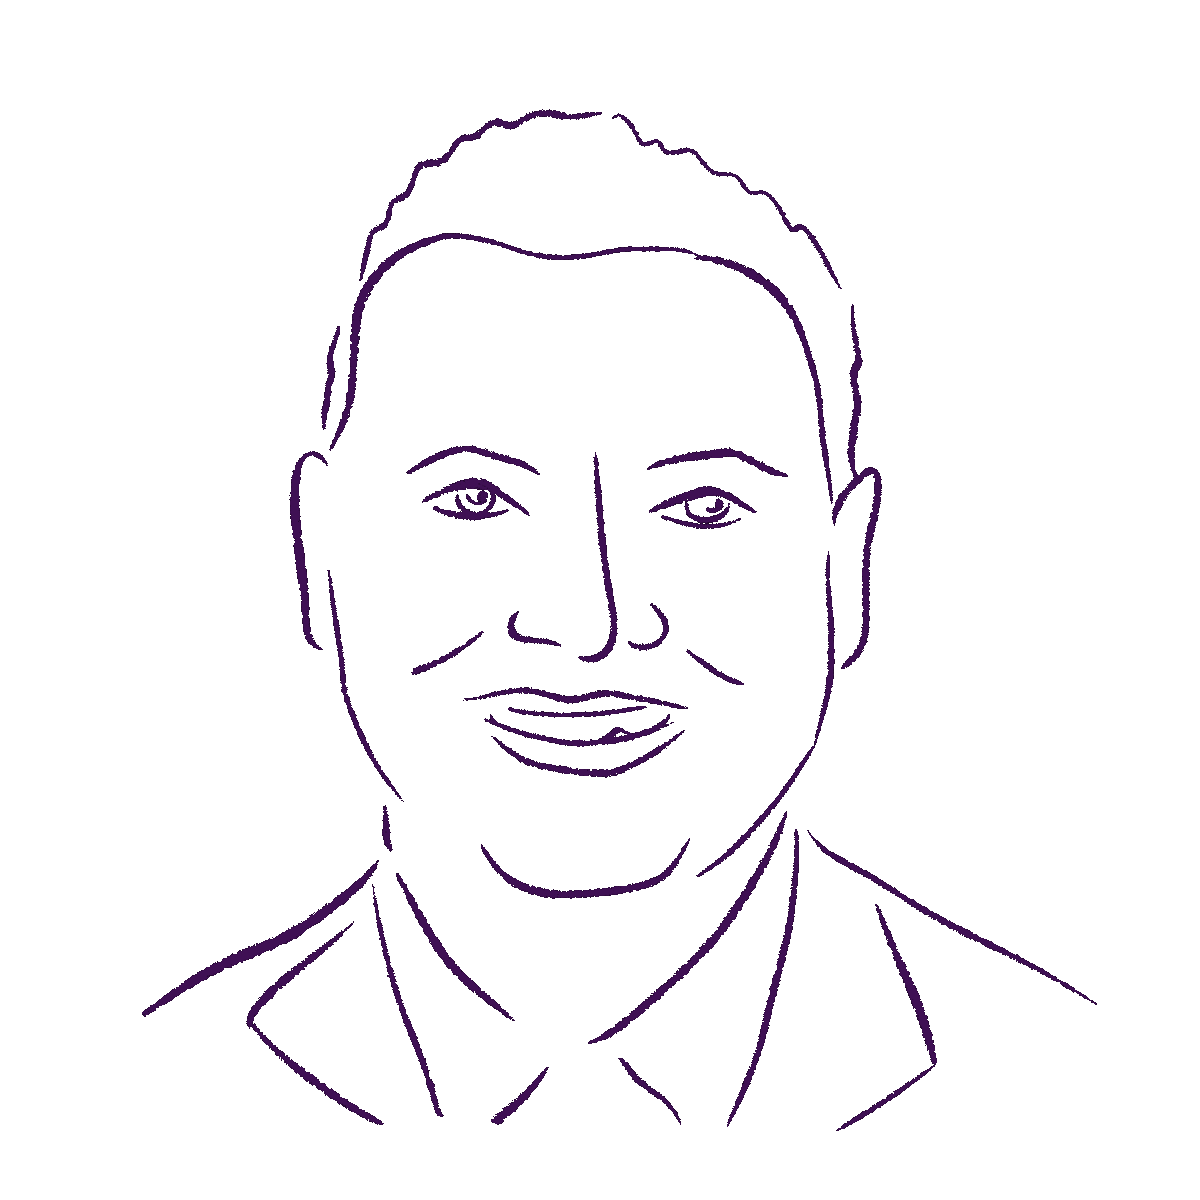 A gif line art portrait of Luis Alvarado, Global Fixed Income Strategist at WFII.